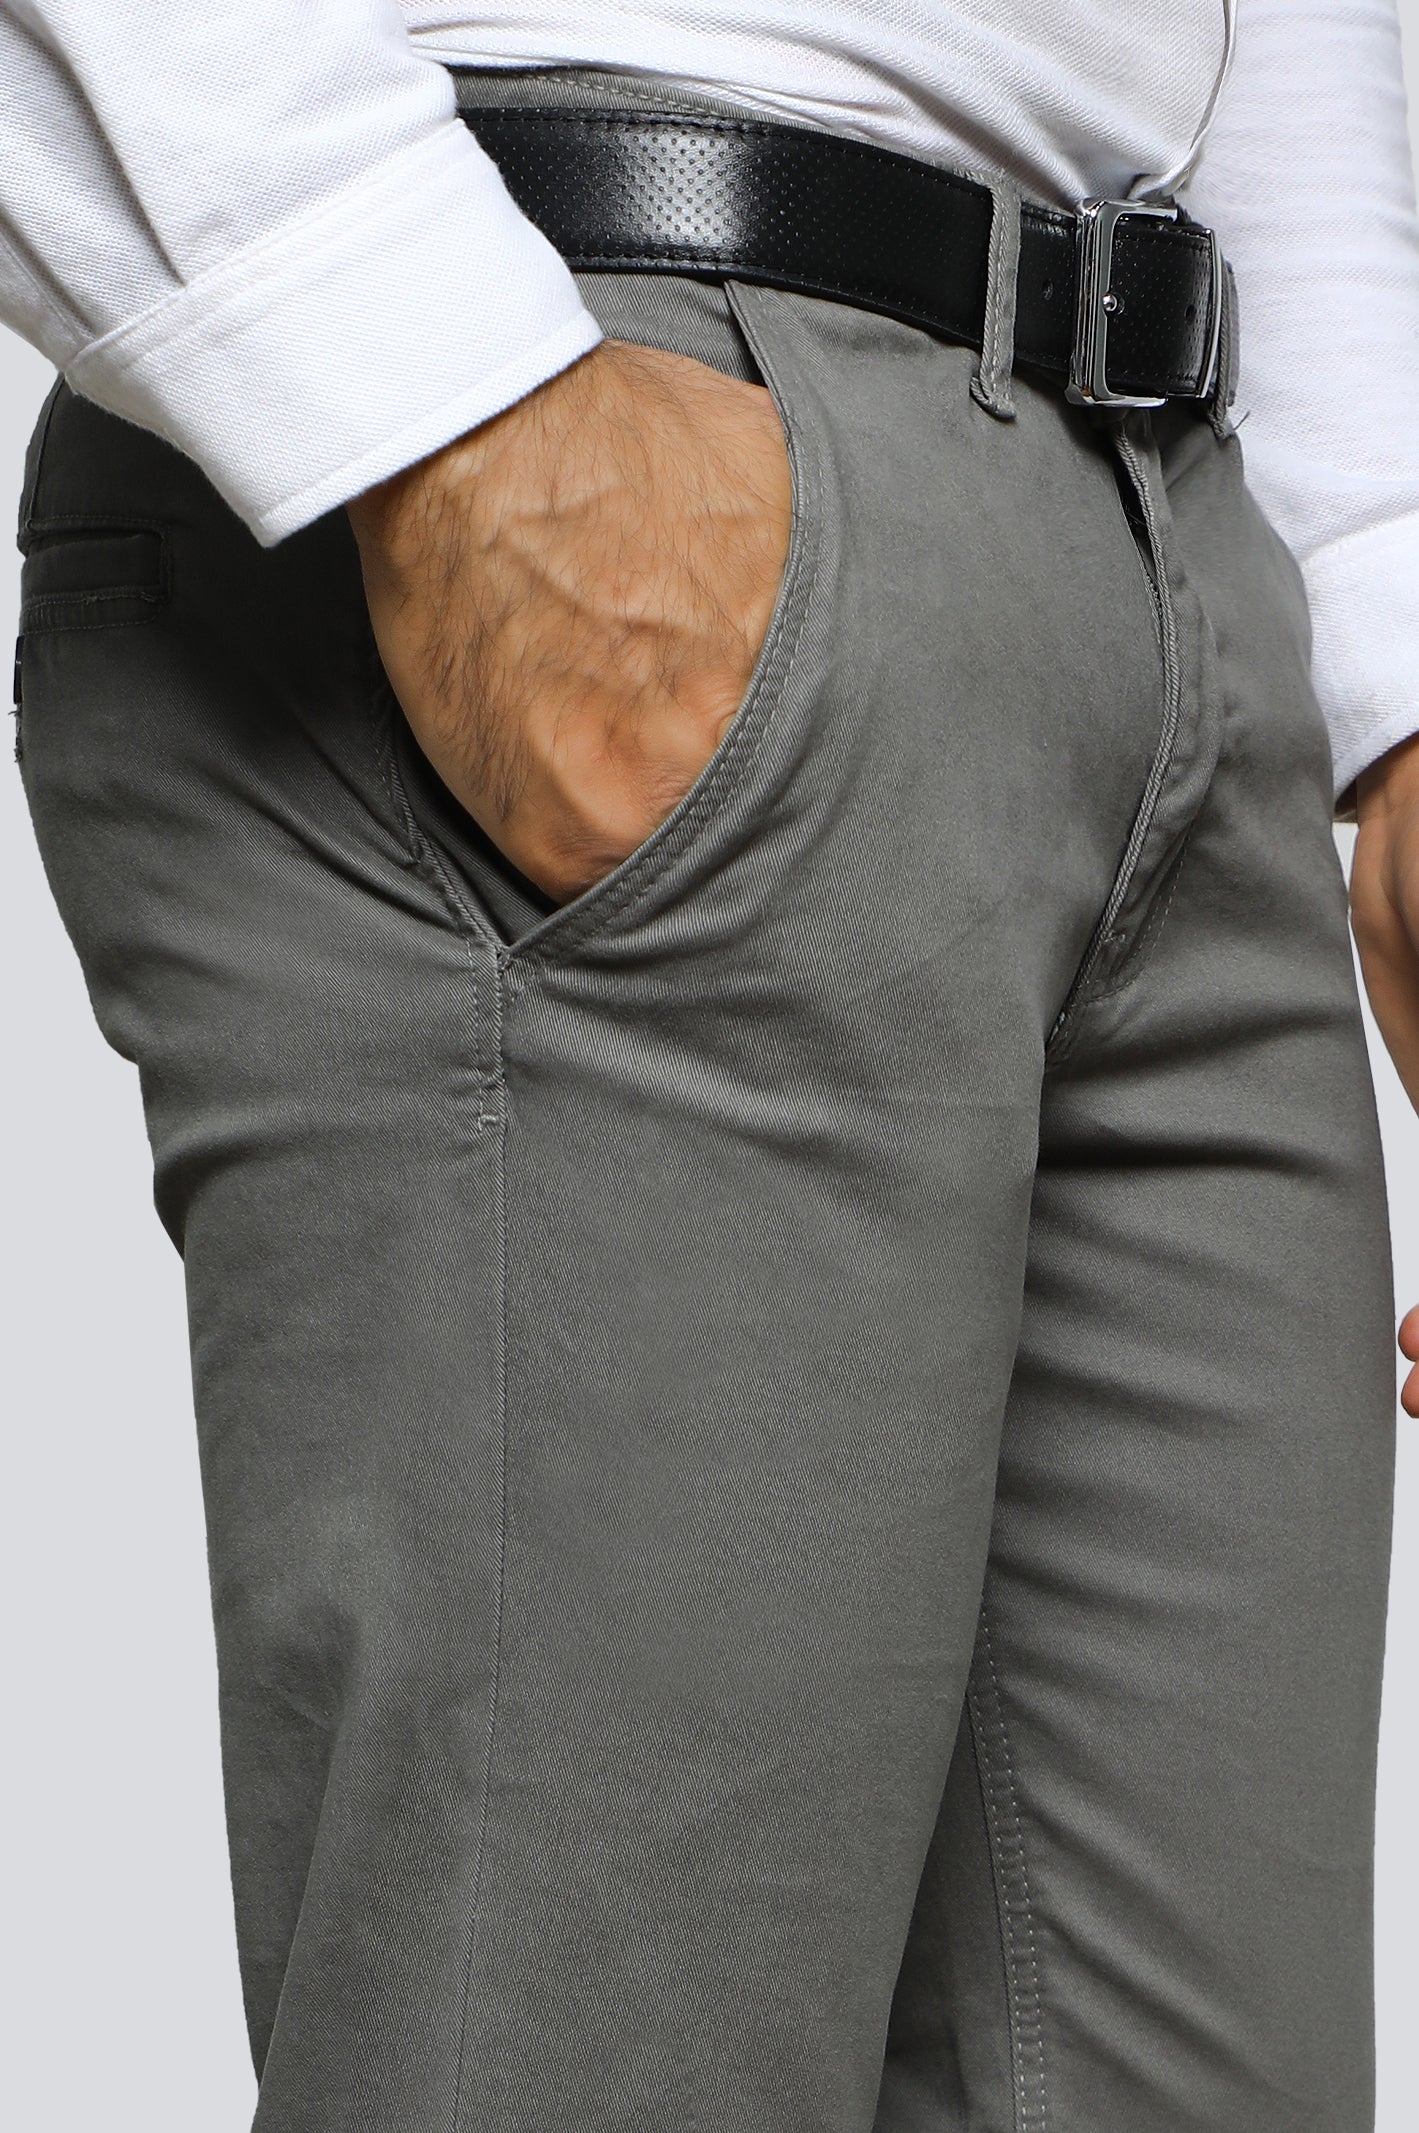 Formal Cotton Trouser for Men - Diners